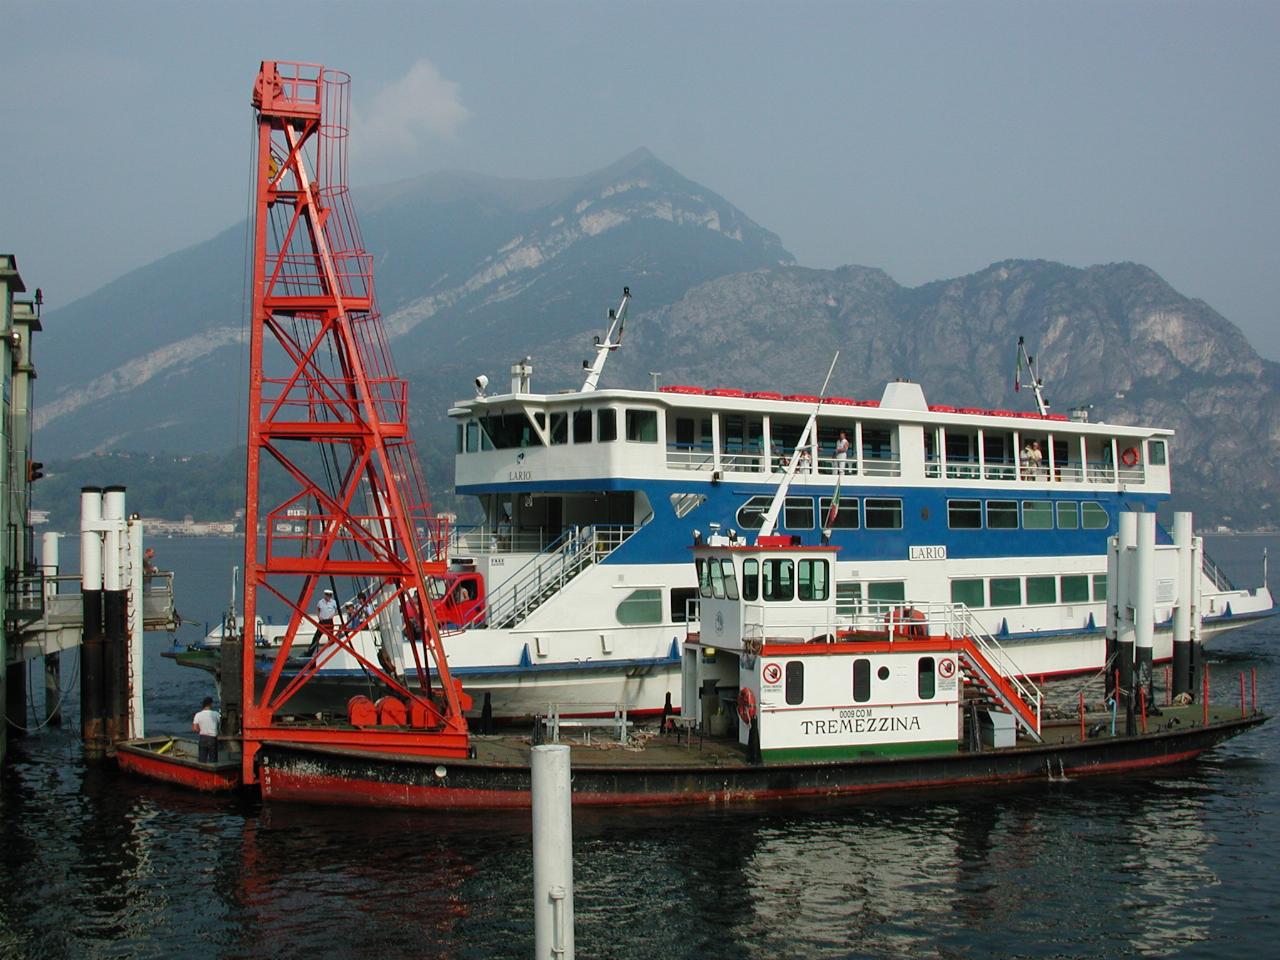 Car and passenger ferry arriving at Bellagio dock on Lake Como